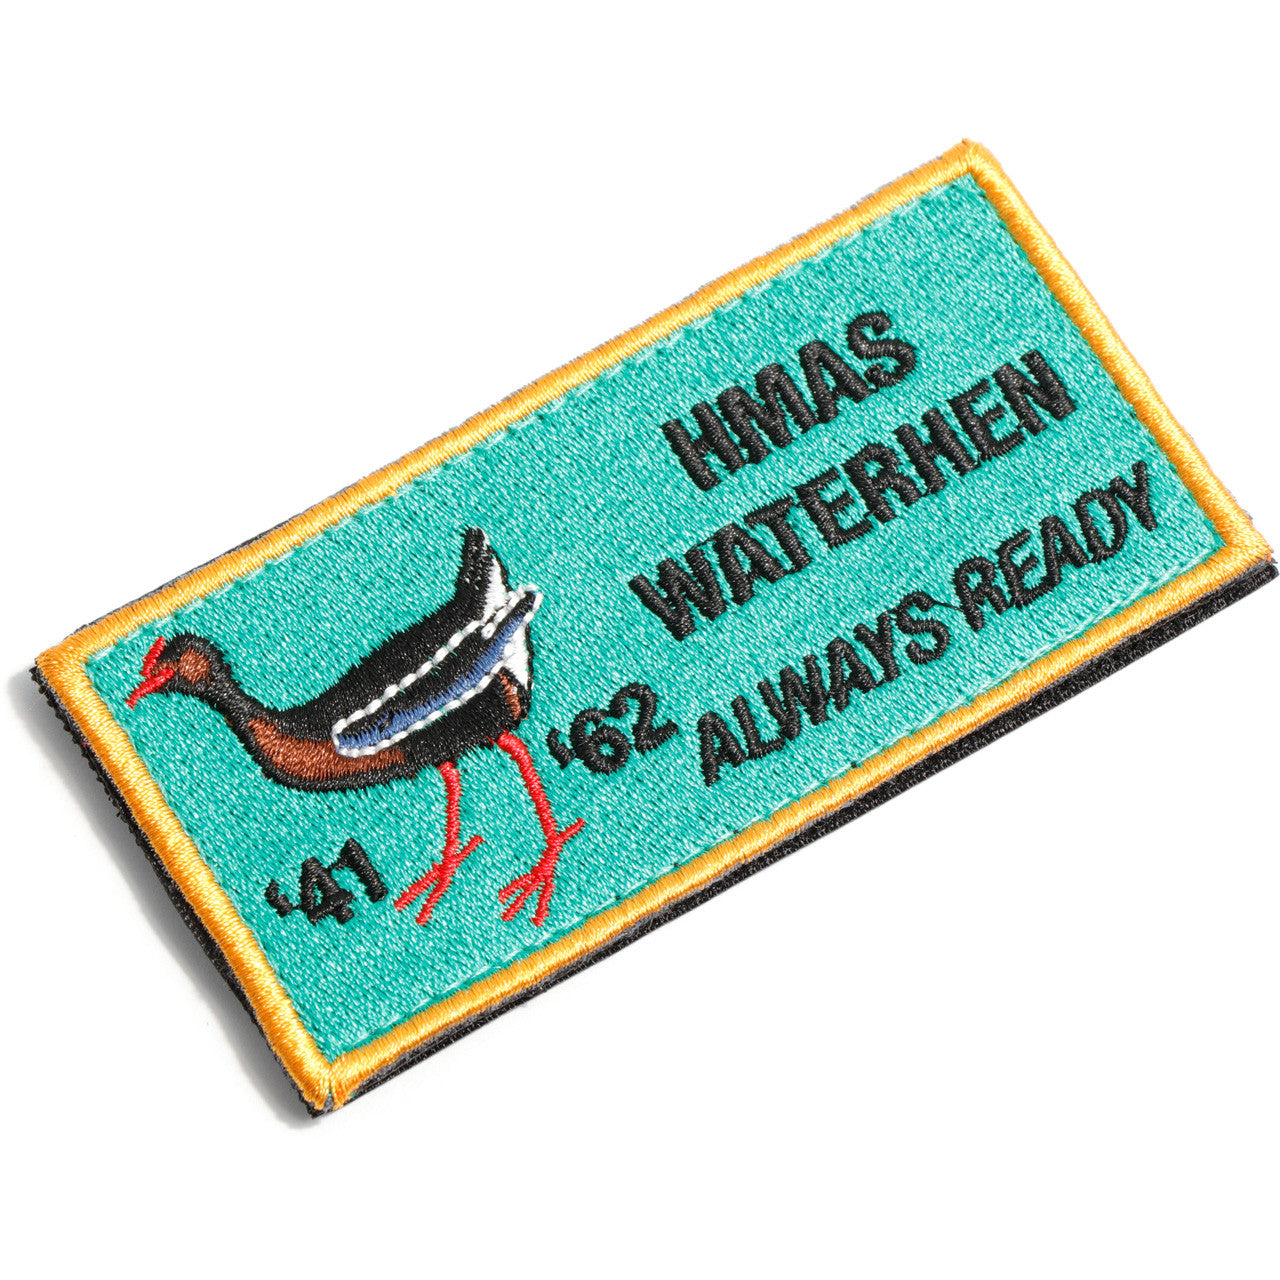 The HMAS Waterhen DPNU Patch is a must-have accessory for all navy enthusiasts. This embroidered patch features the iconic HMAS Waterhen design, measuring 100x50mm. With its convenient hook-and-loop backing, it can be easily attached to any garment or accessory. Show your support for the navy with this high-quality patch. www.defenceqstore.com.au